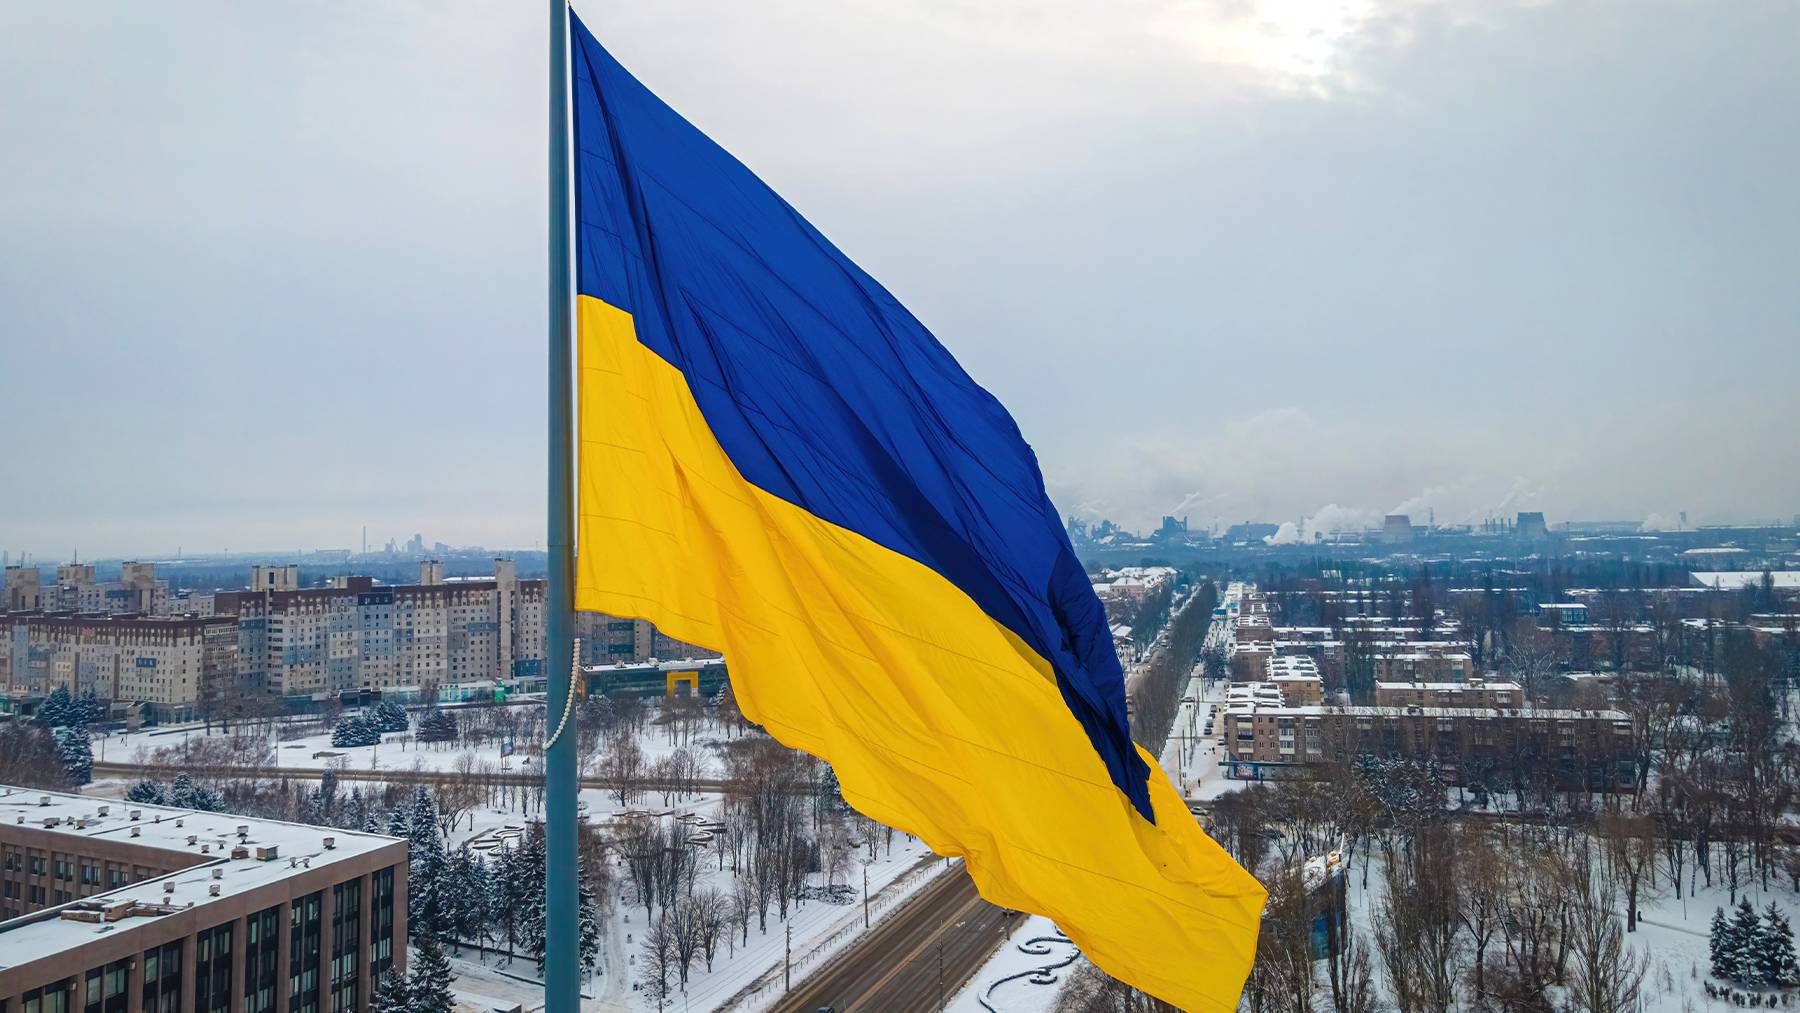 Ukraine's blue and yellow flag stands in the foreground against a backdrop of a snowy city.